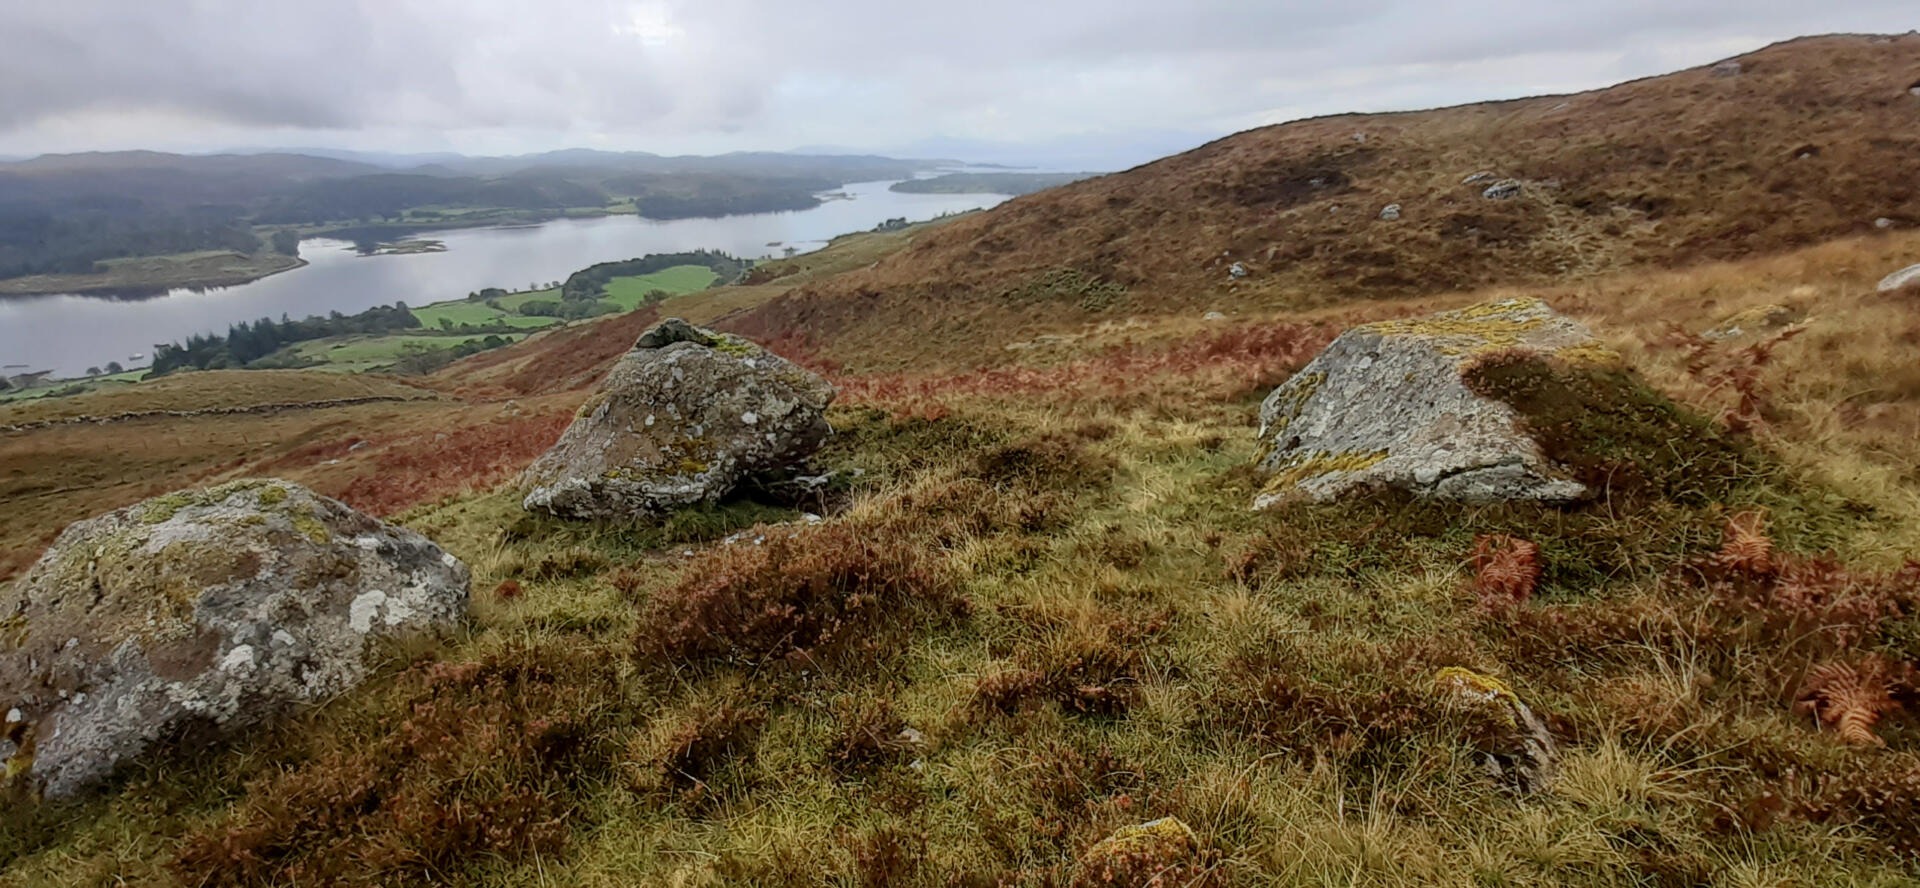 Open hillside with boulders in the foreground and a loch in the background